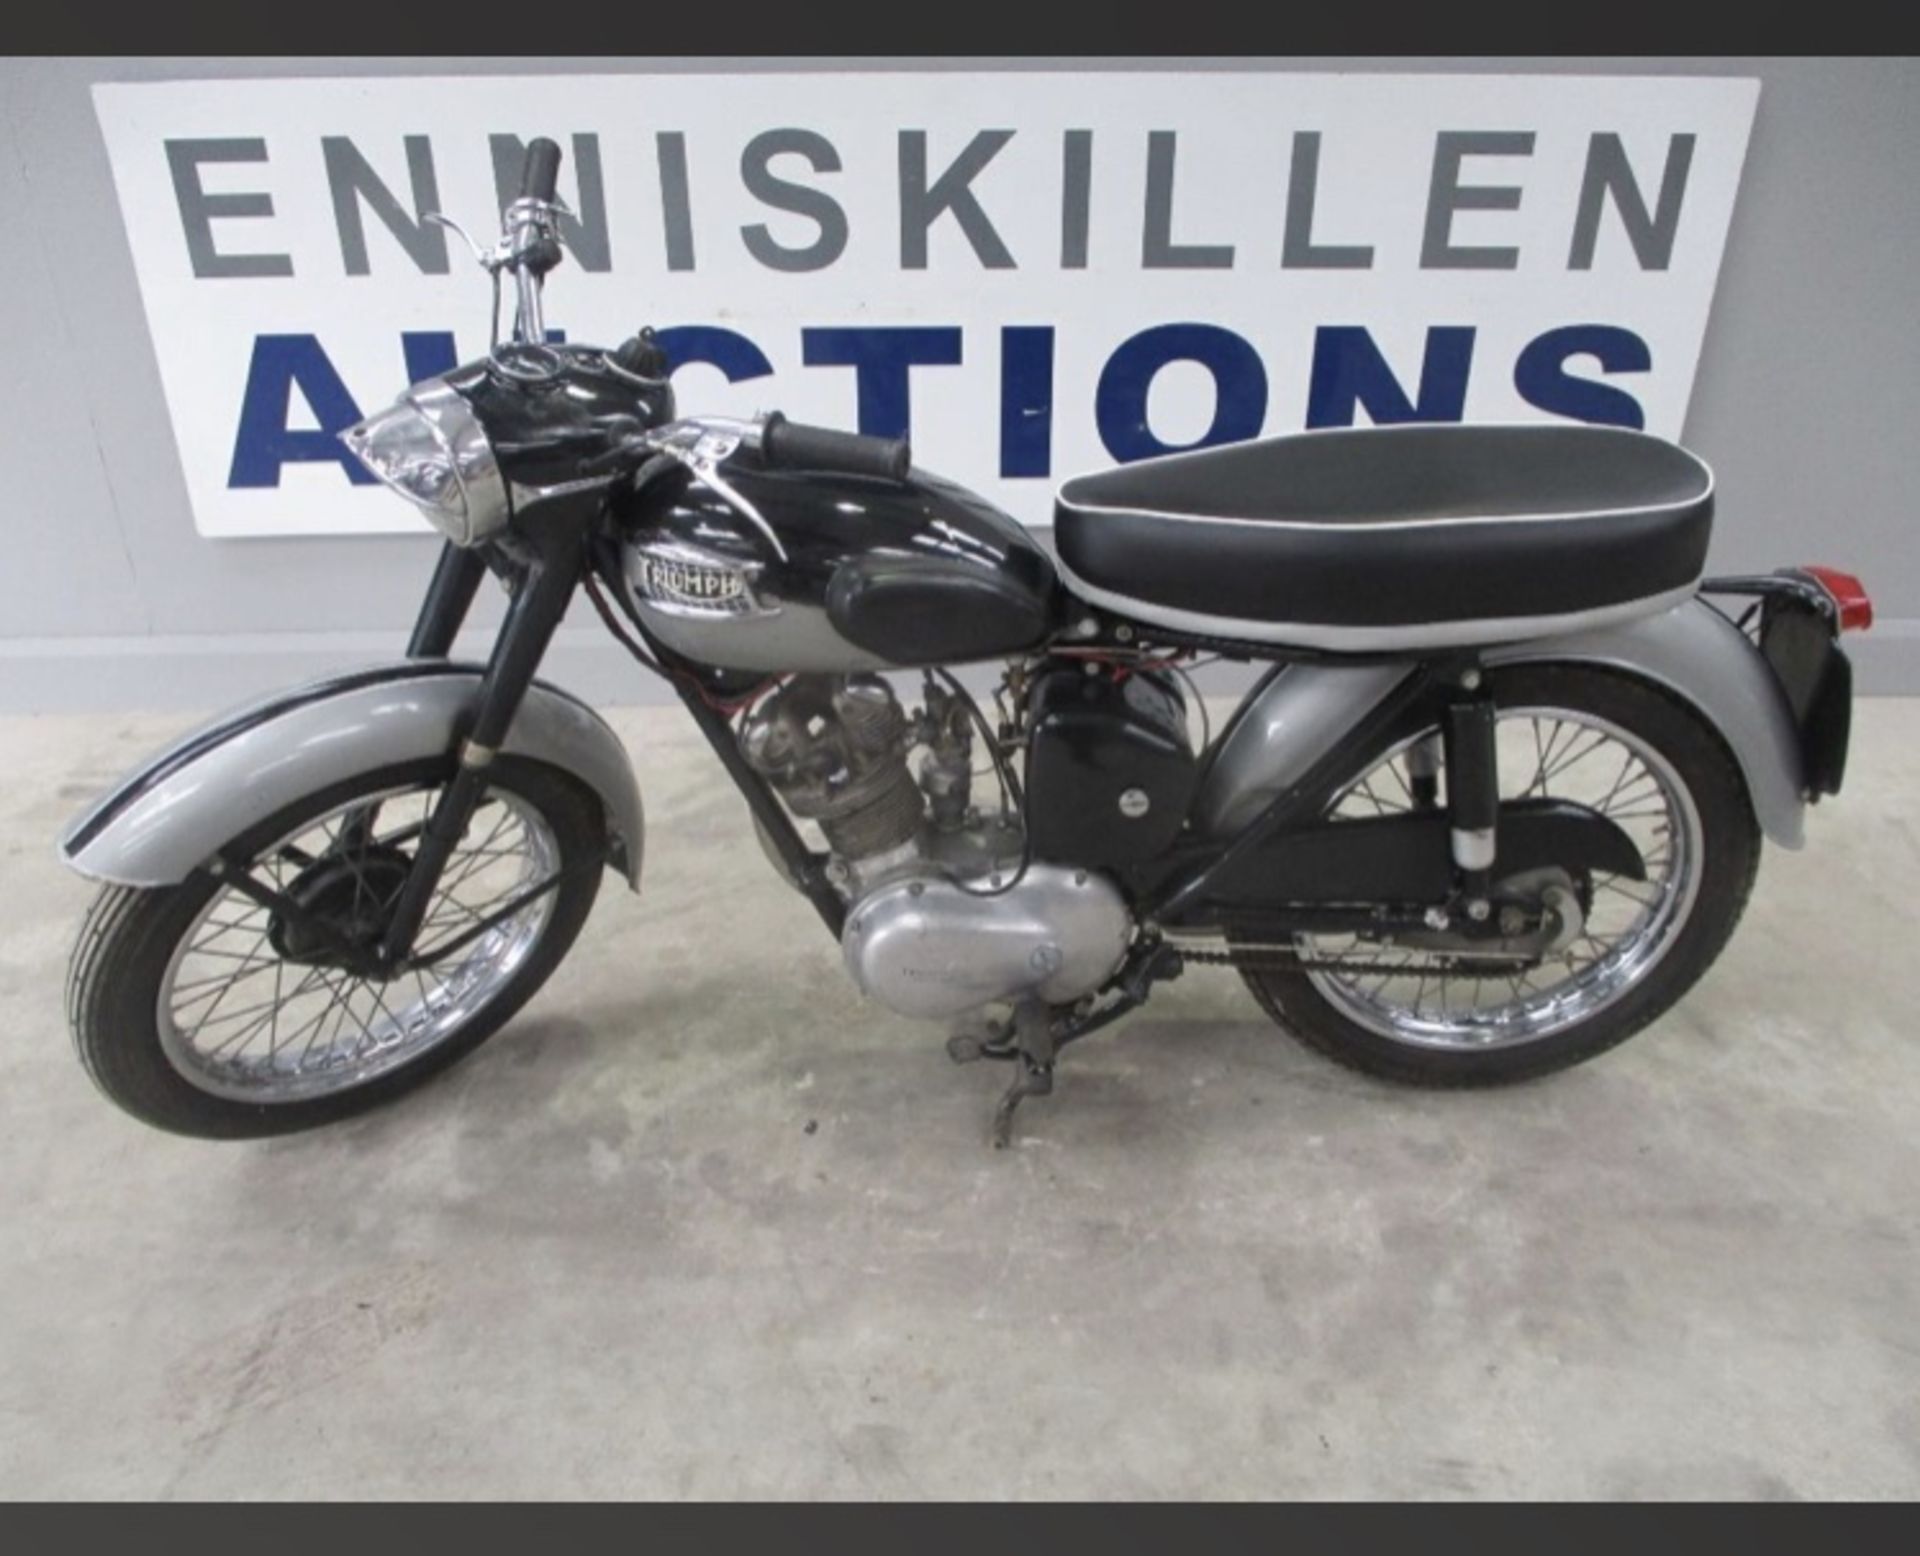 1959 TRIUMPH CLASSIC RARE VINTAGE MOTORCYCLE19000 MILES...LOCATION N IRELAND - Image 2 of 4